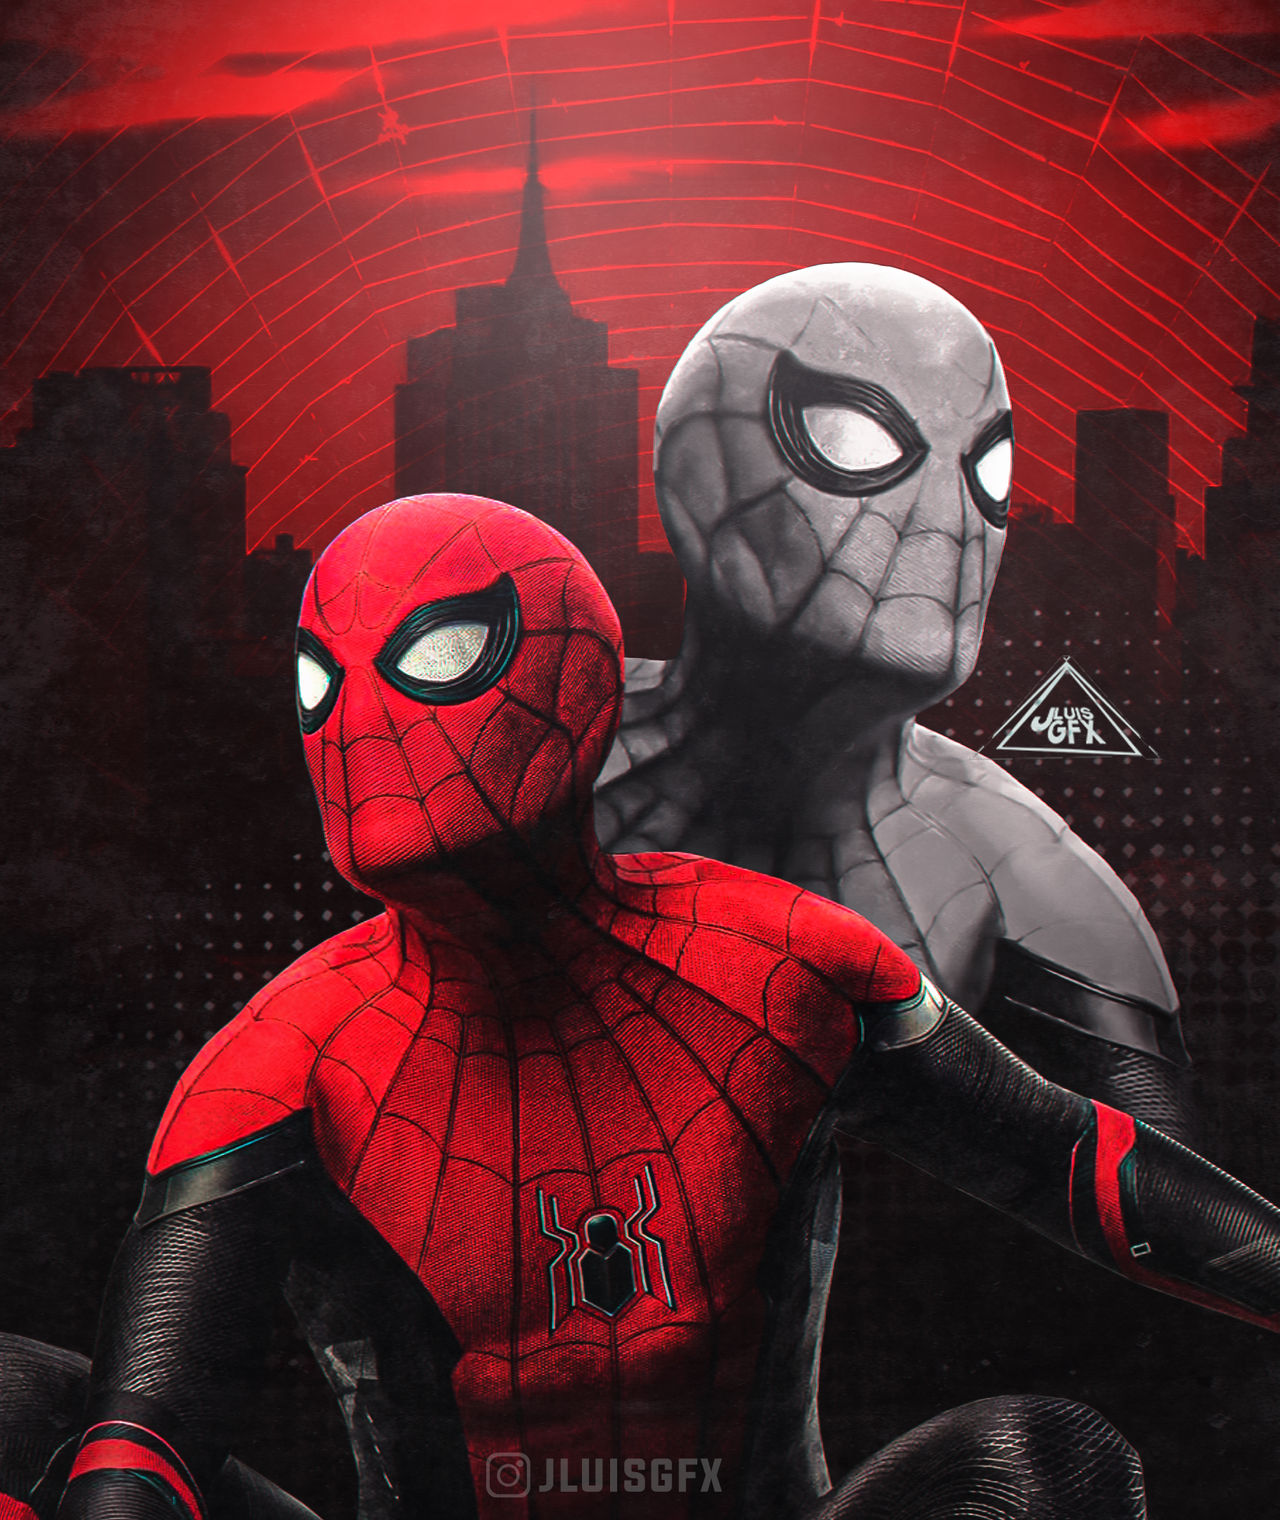 Tom Holland Spiderman - wallpaper by JeanLuisEditions on DeviantArt